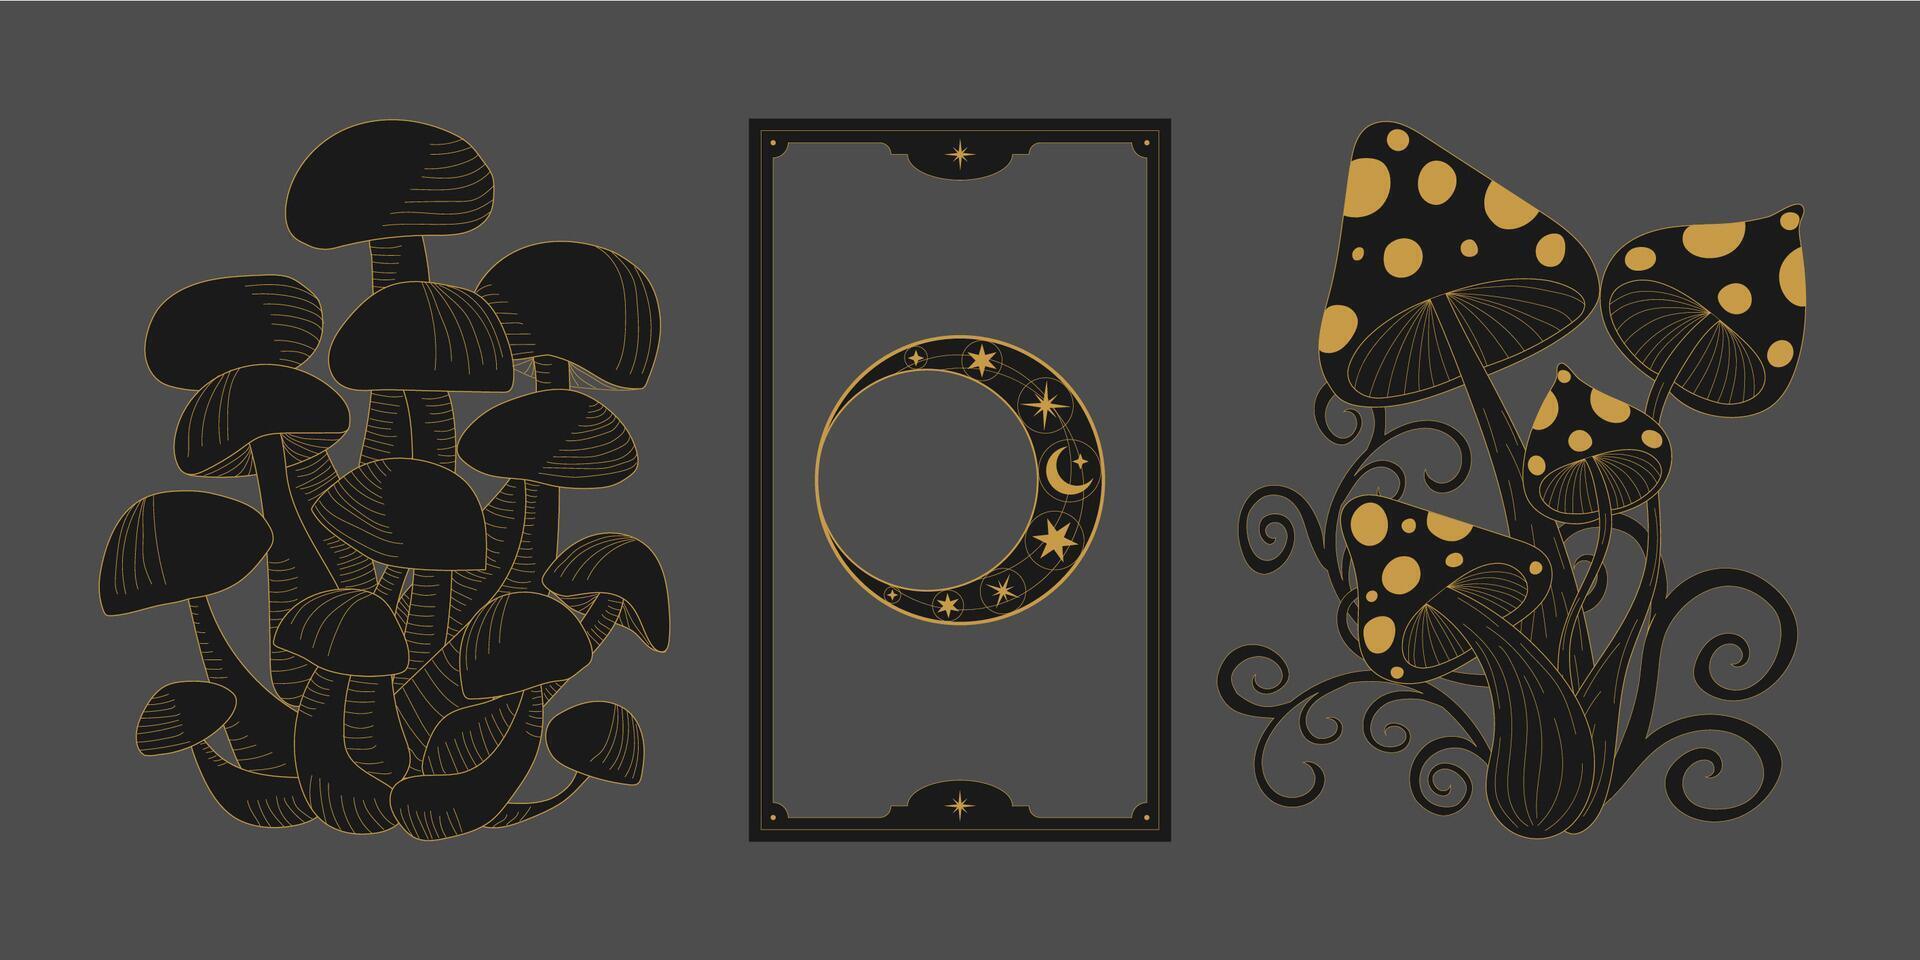 mystic celestial set a with golden outline mushrooms, fly agaric, penny bun, crescents and moon phases. Black occult shiny linear labels with a magical frame stylized as engraving vector